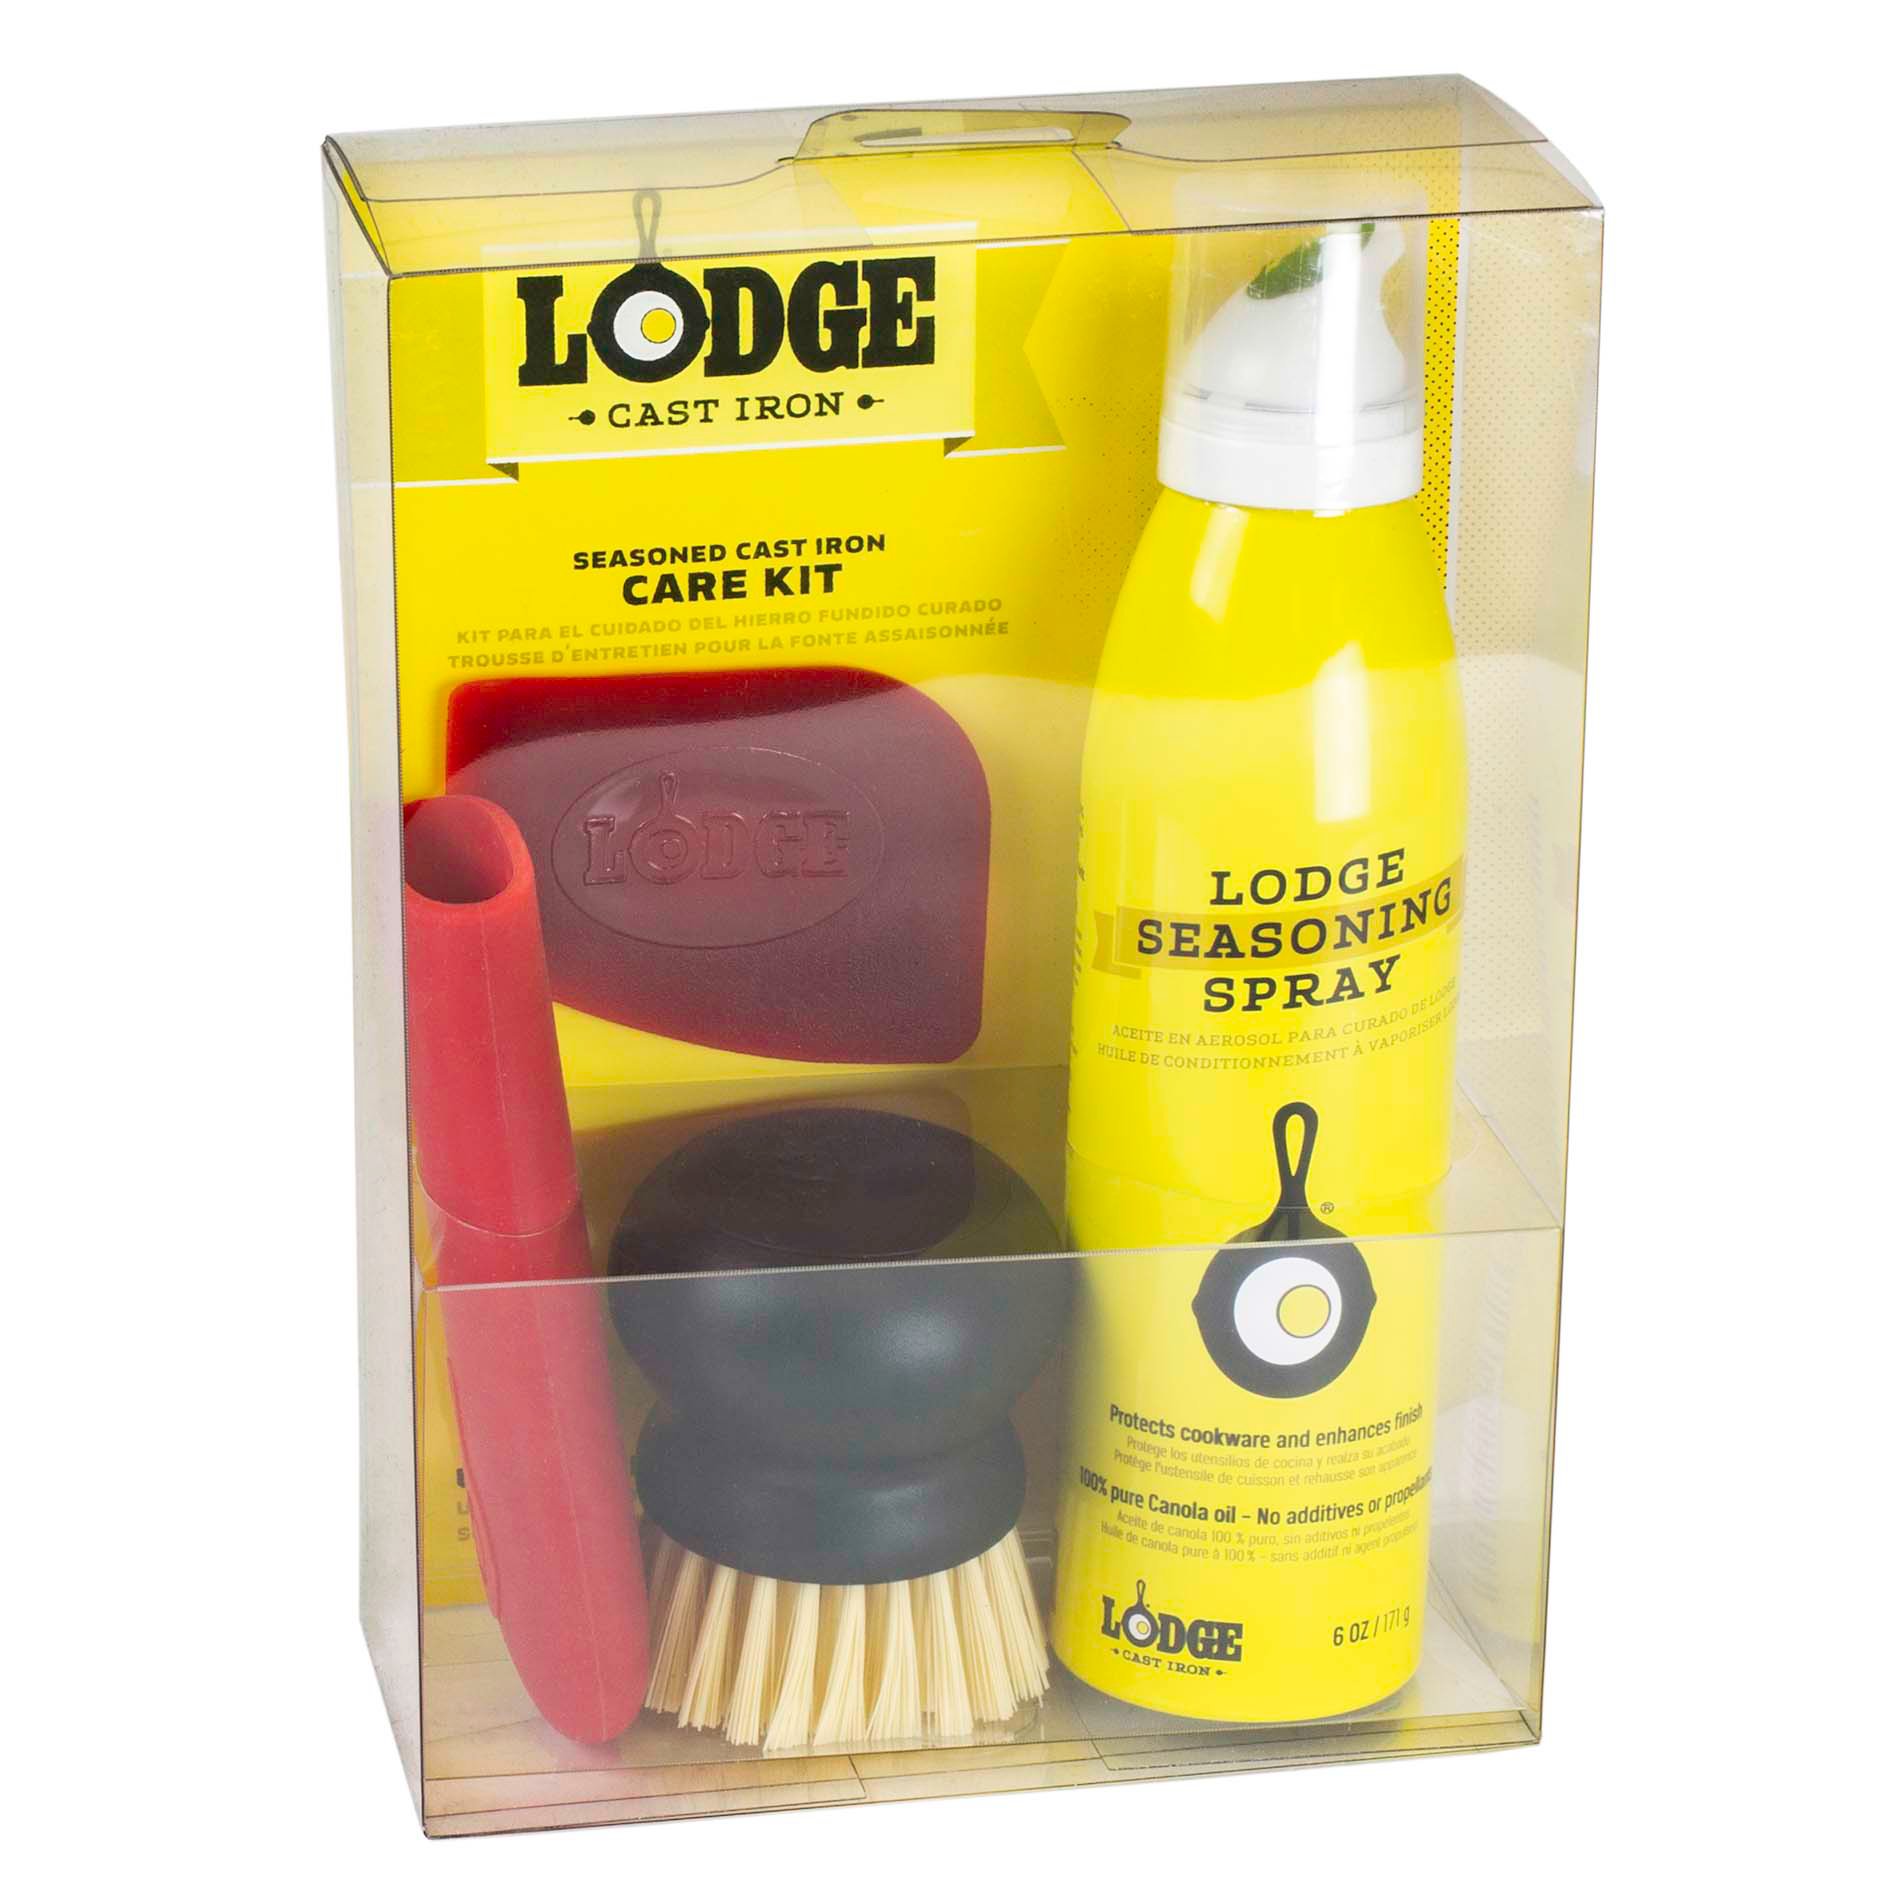 Lodge Care Kit for All Cast Iron Cookware Free2dayship Taxfree for sale online 